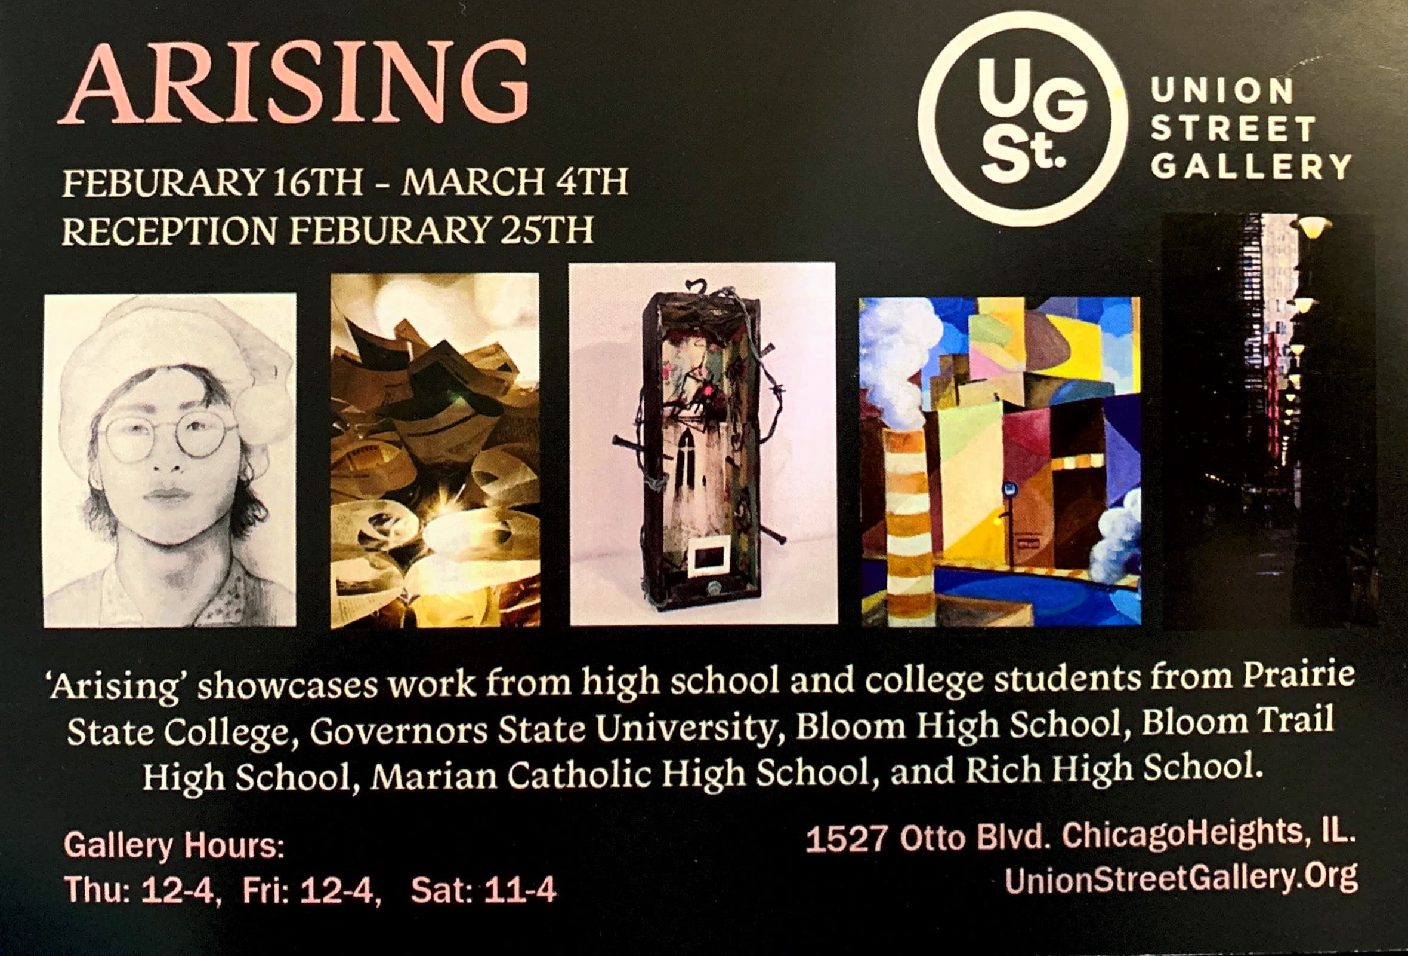 GSU students among artists showing their work at Union Street Gallery